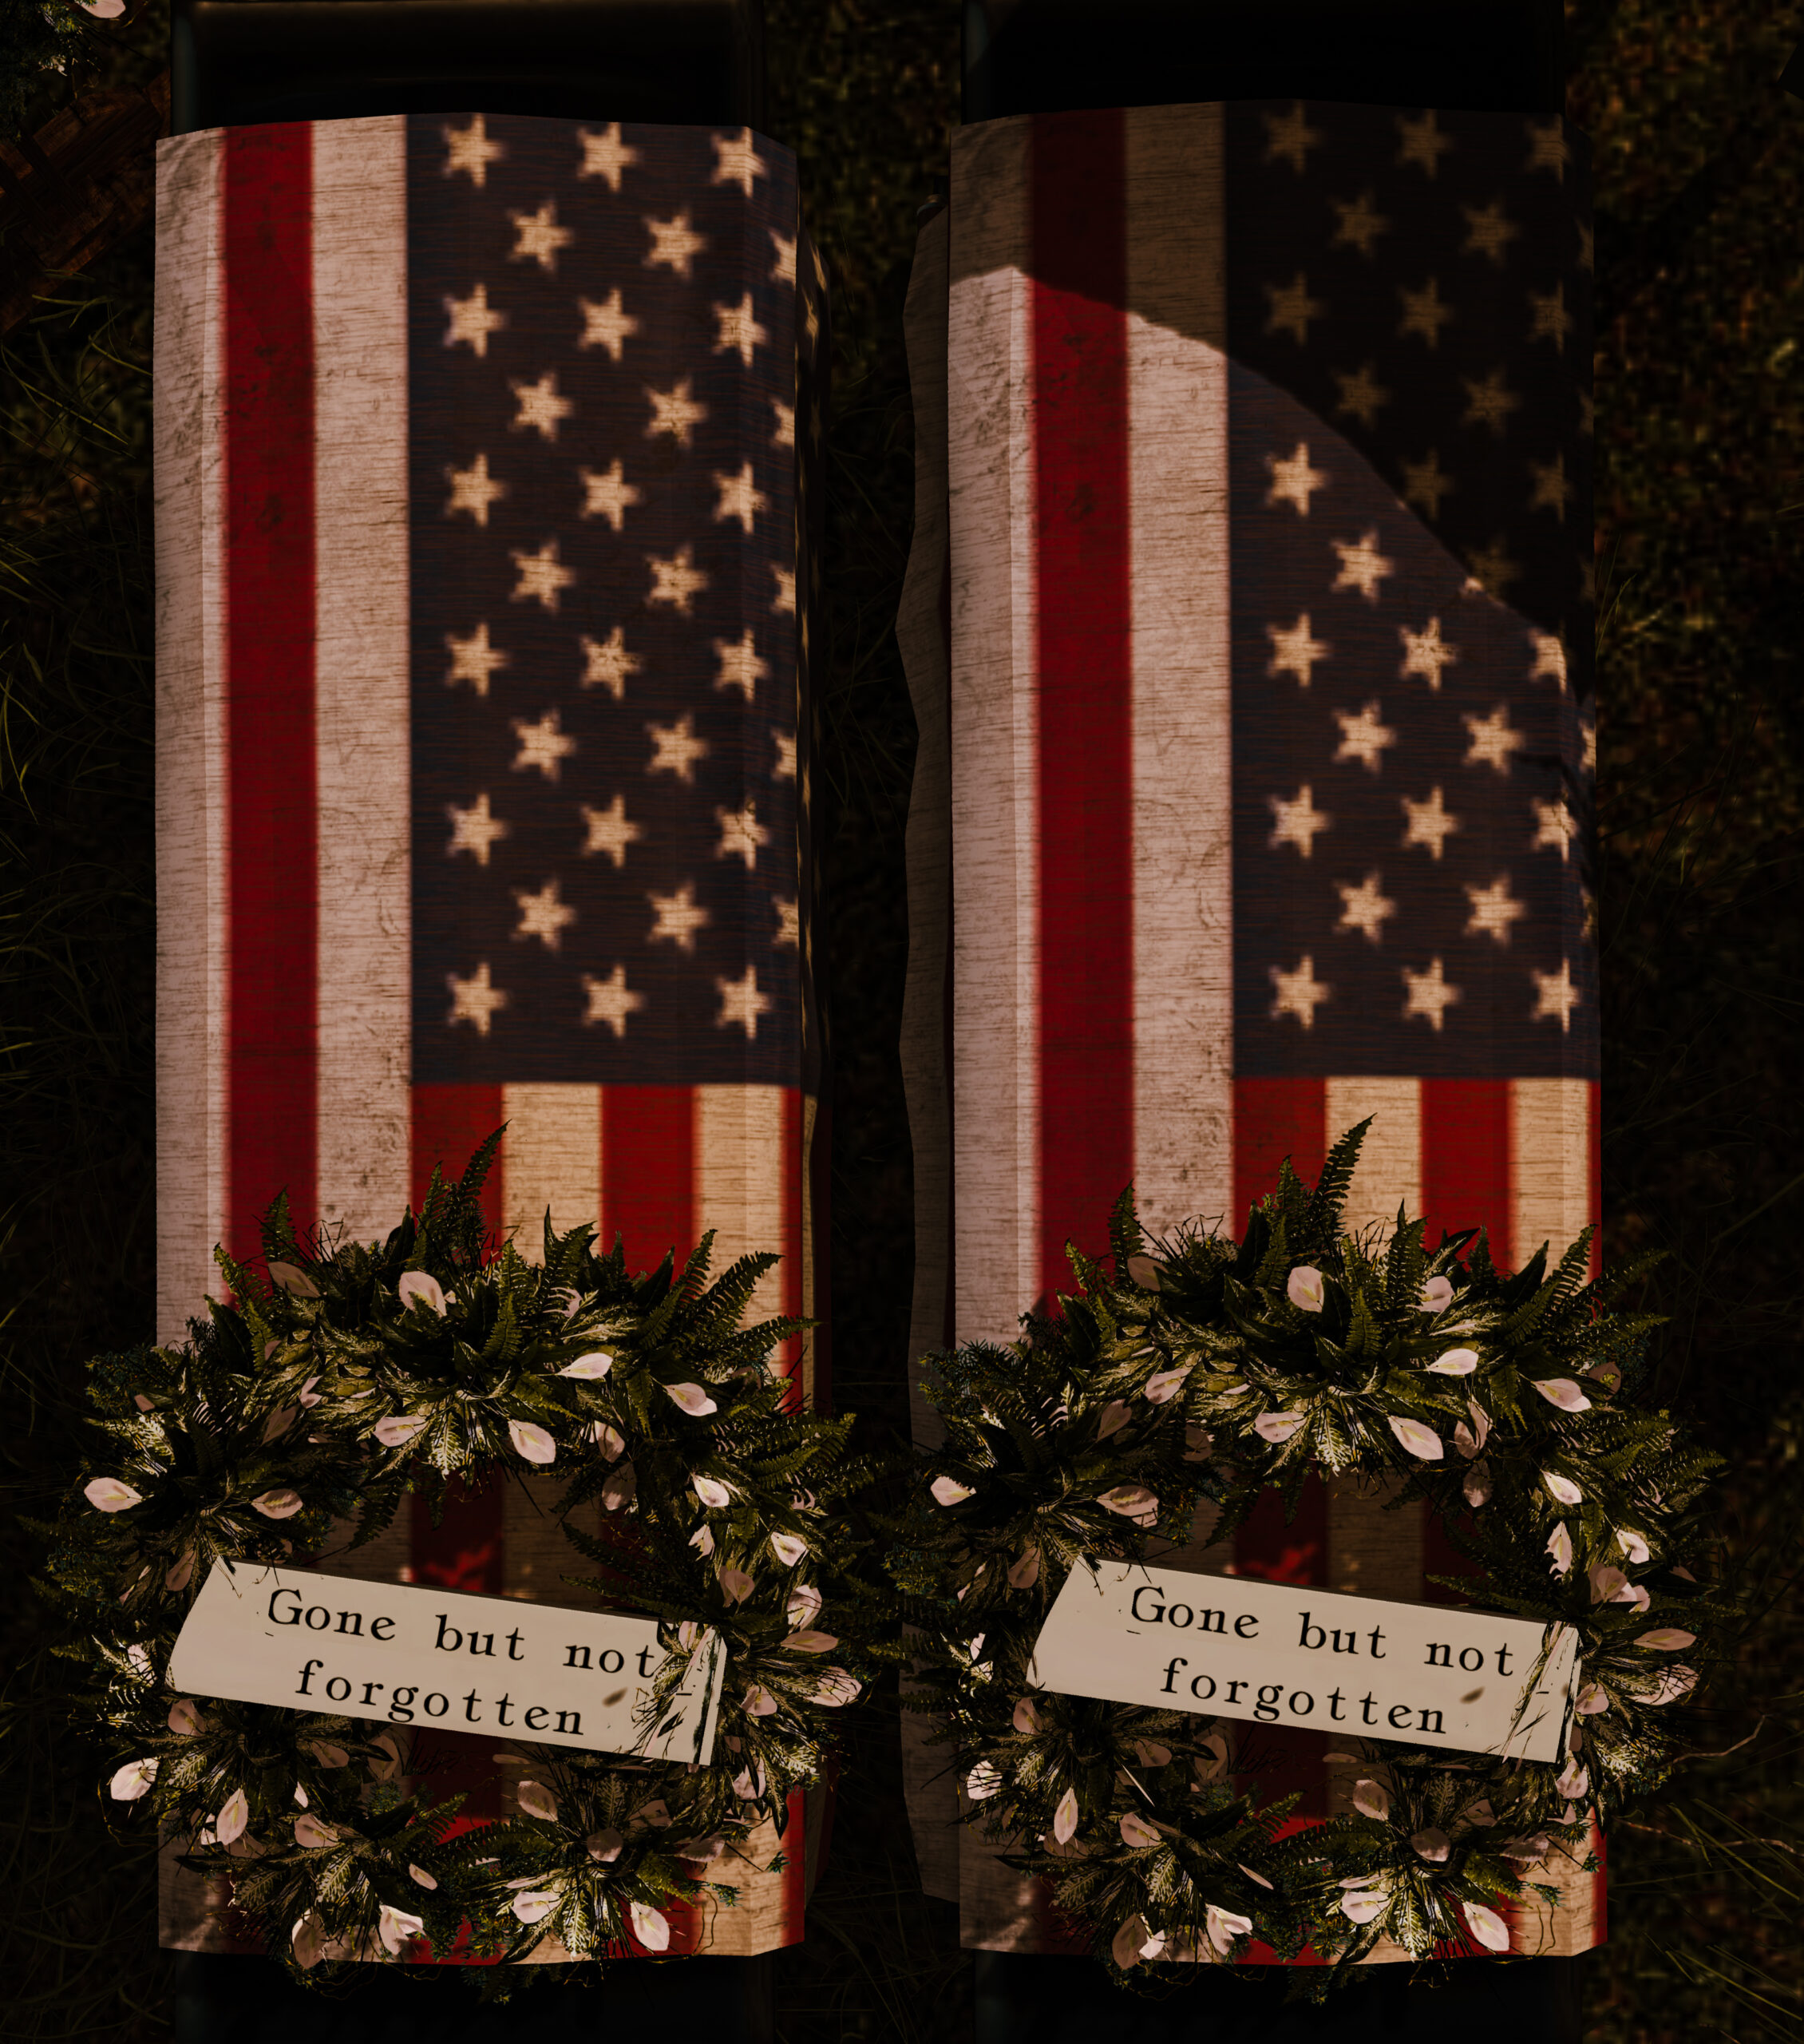 Two coffins, draped in the American flag with remembrance wreathes